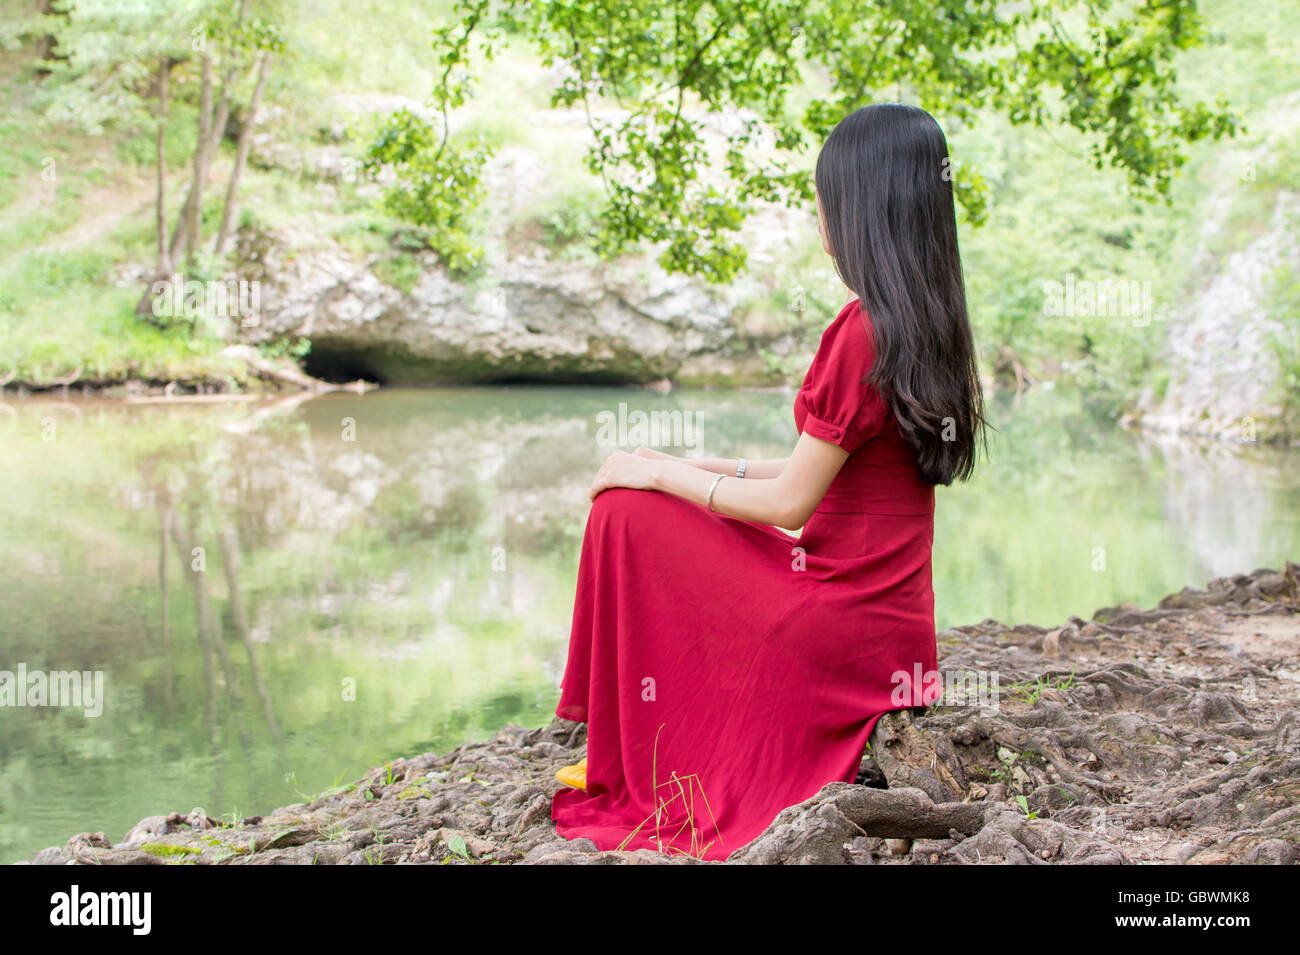 Fashionable woman sitting by the river alone Stock Photo